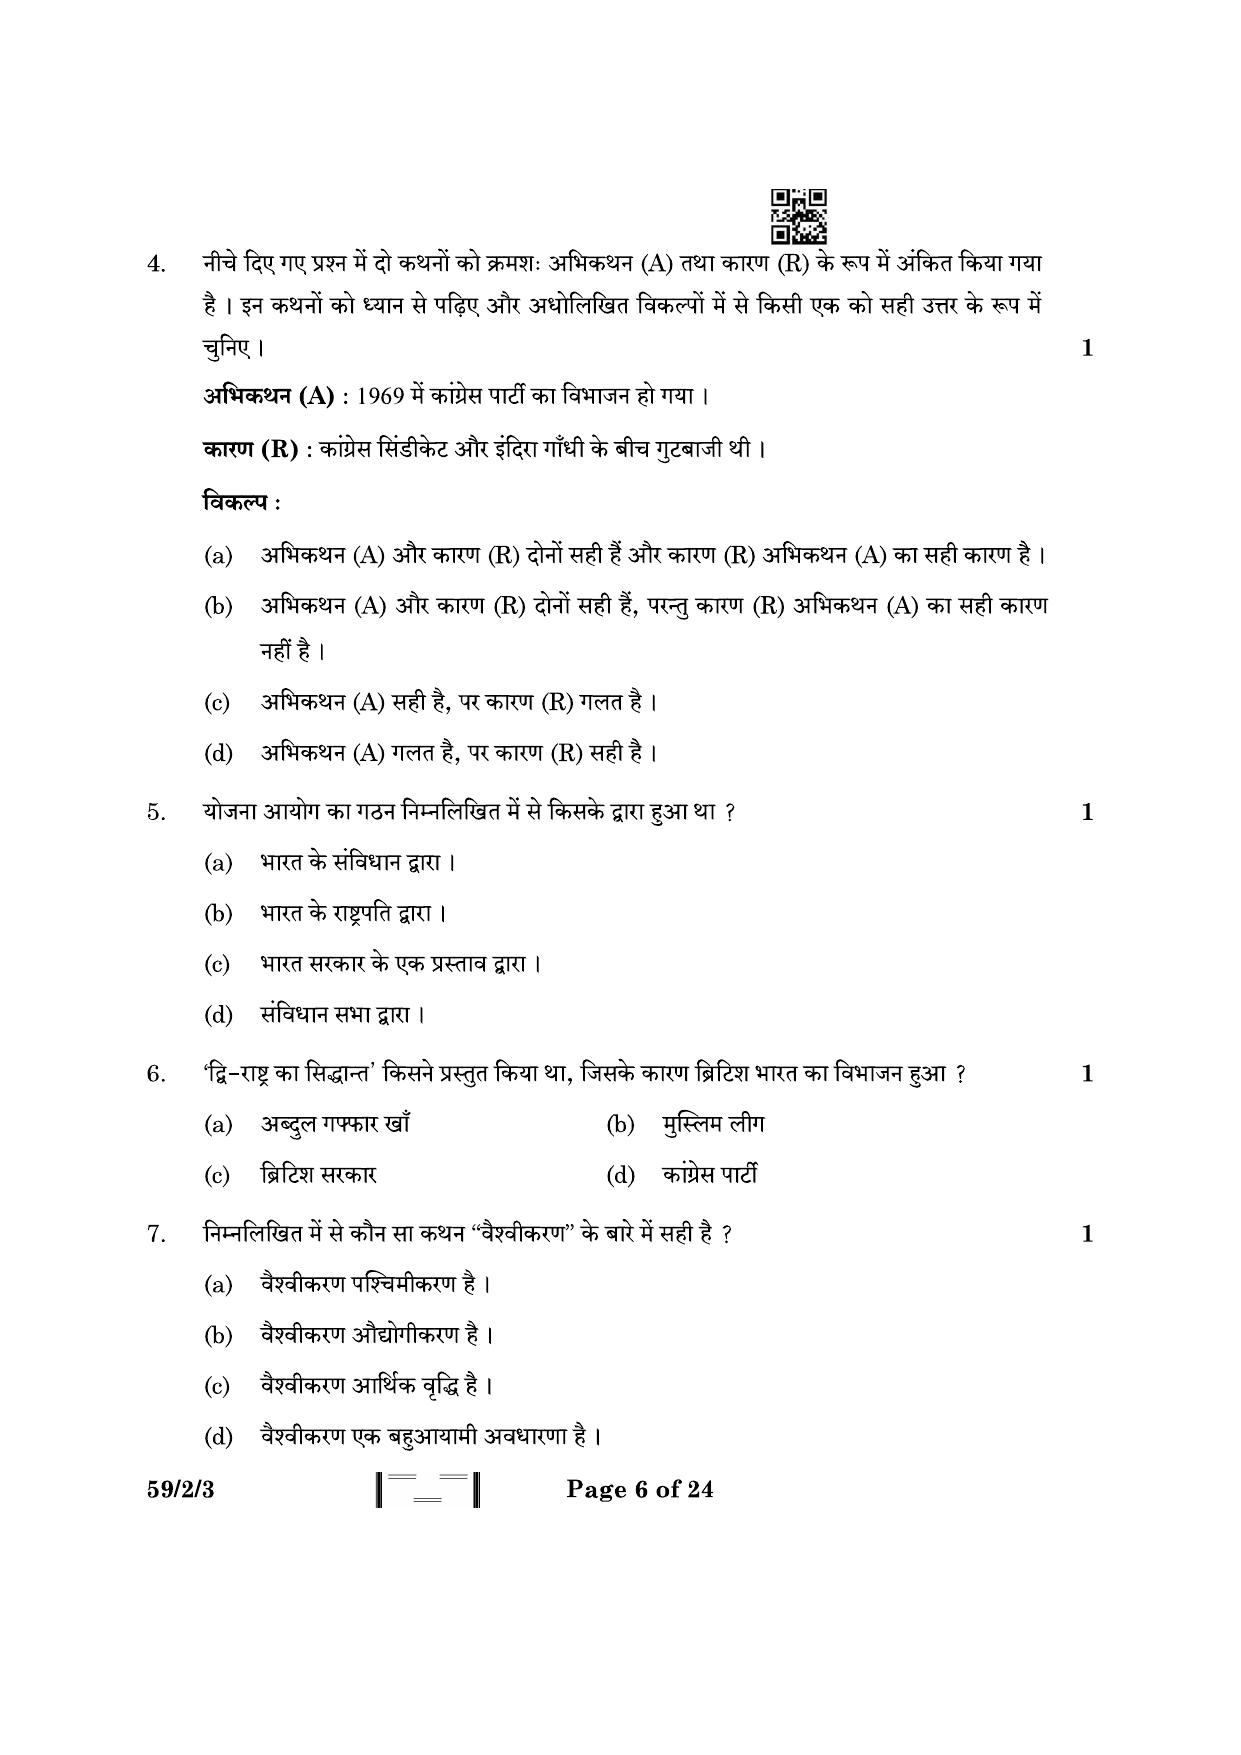 CBSE Class 12 59-2-3 Political Science 2023 Question Paper - Page 6